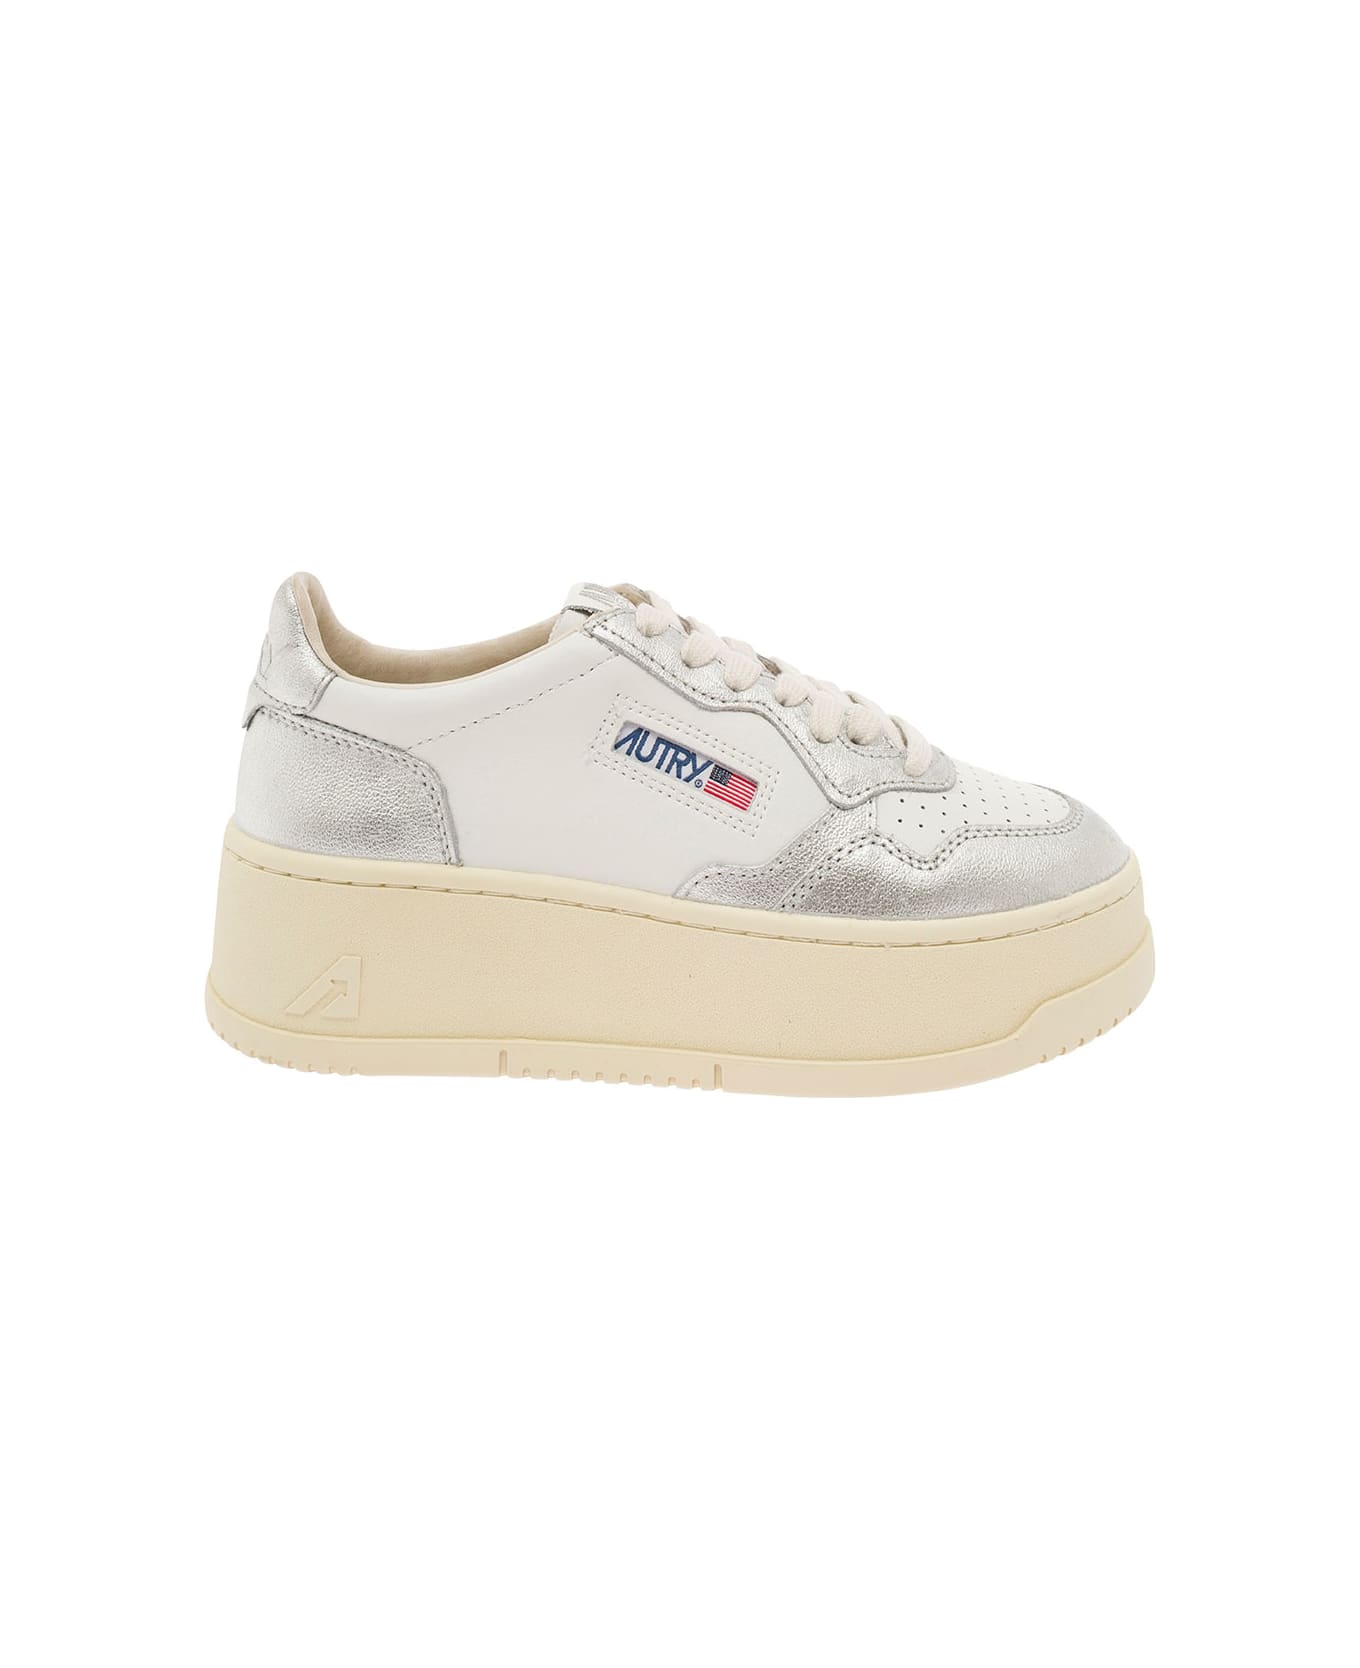 Autry White And Silver Low Top Platform Sneakers With Logo In Leather Woman - White